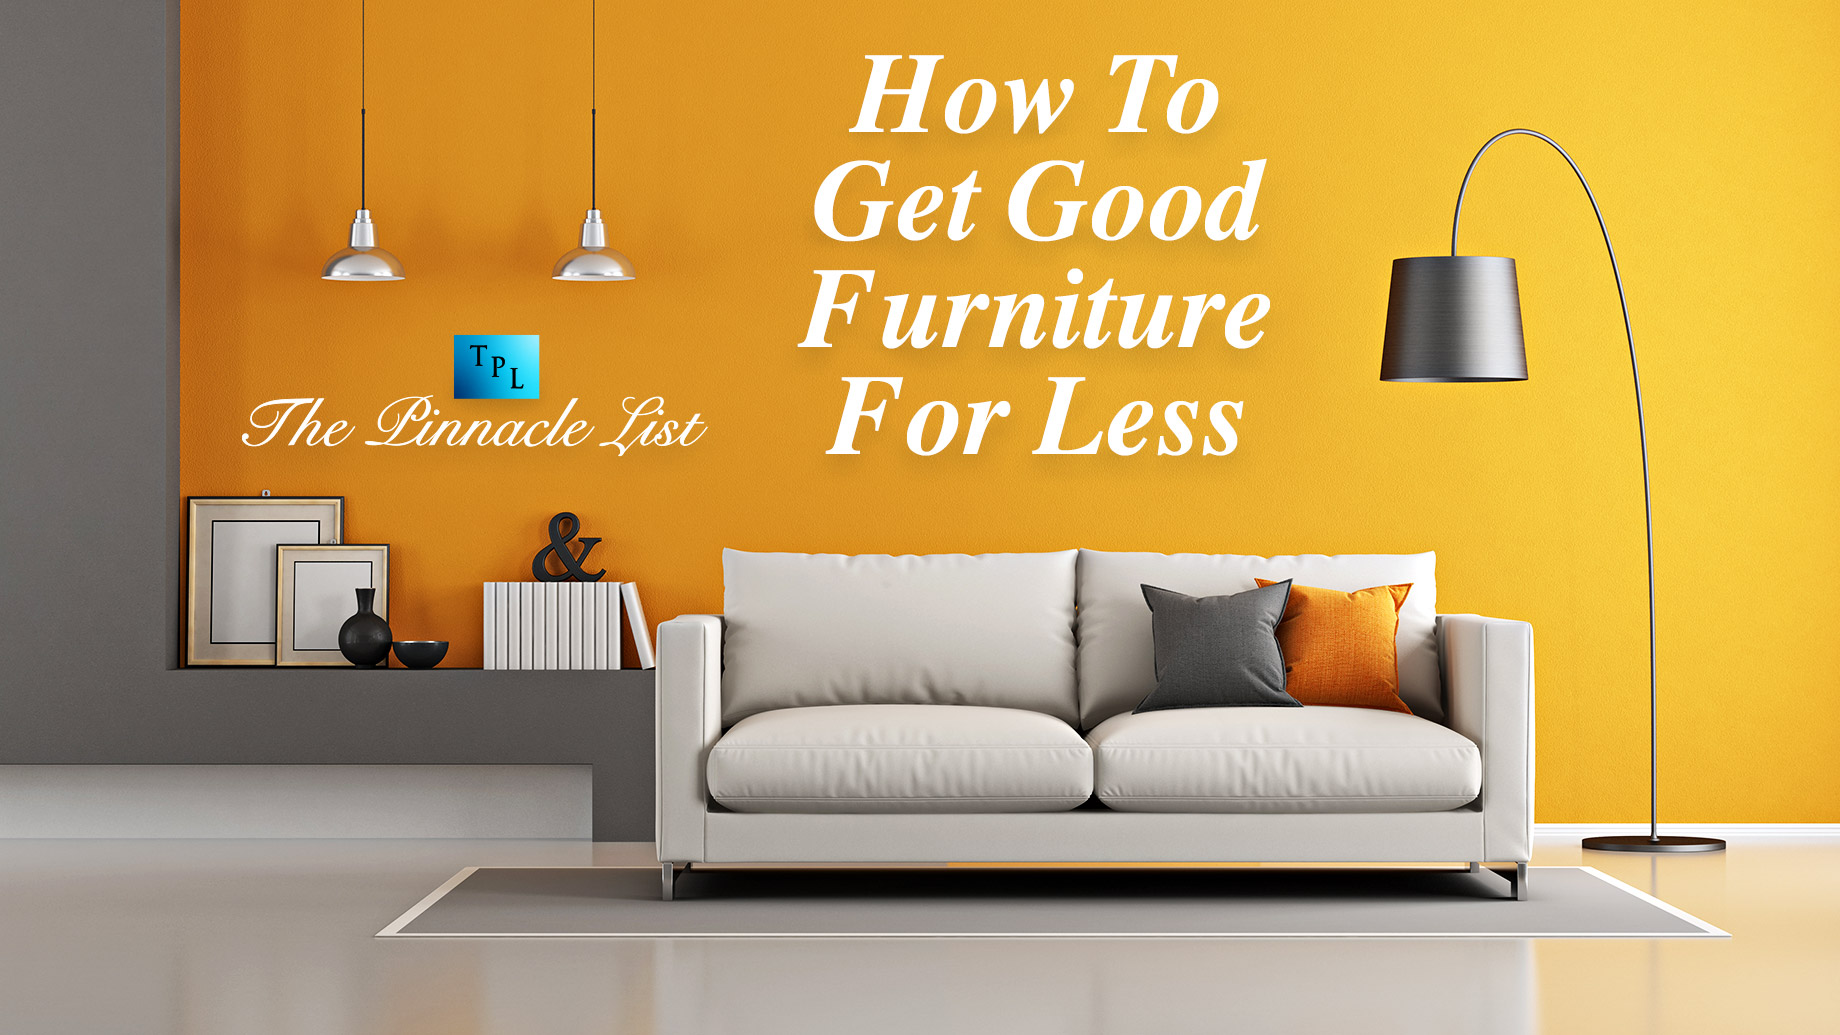 How To Get Good Furniture For Less